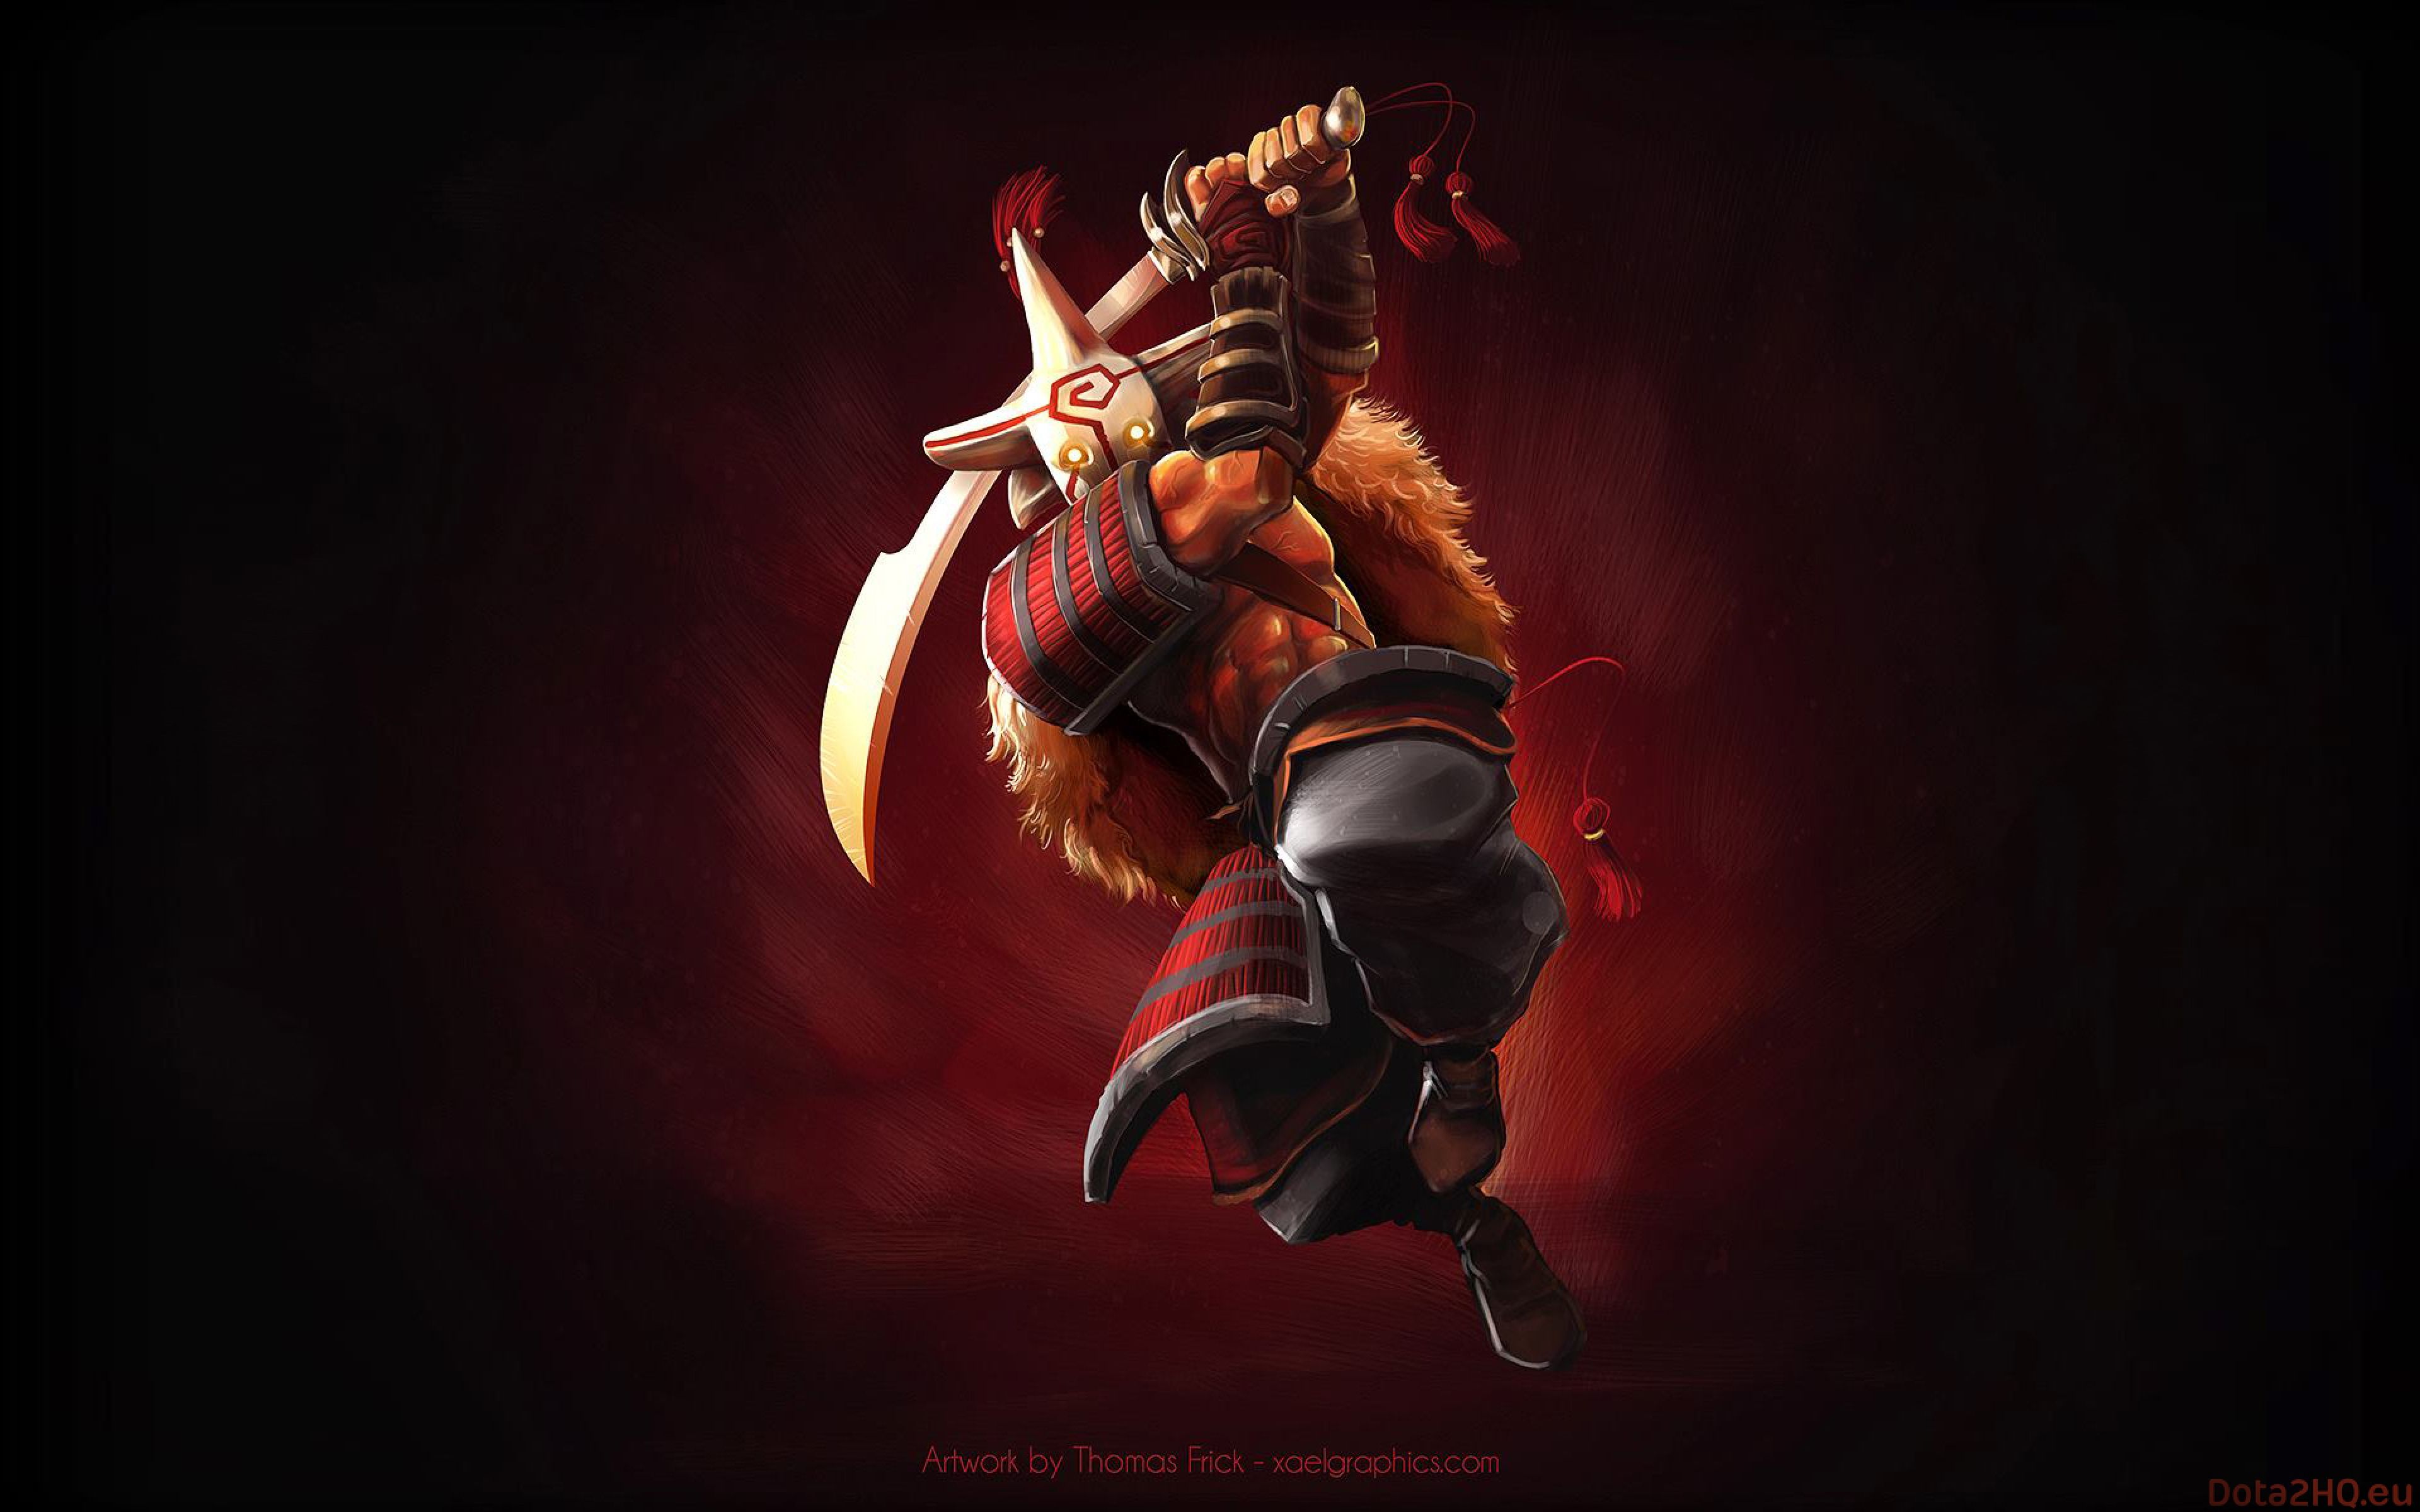 Dota 2 Axe Picture Image Free Download Pc Games Dota 2 Heroes HD Wallpaper & Background Download